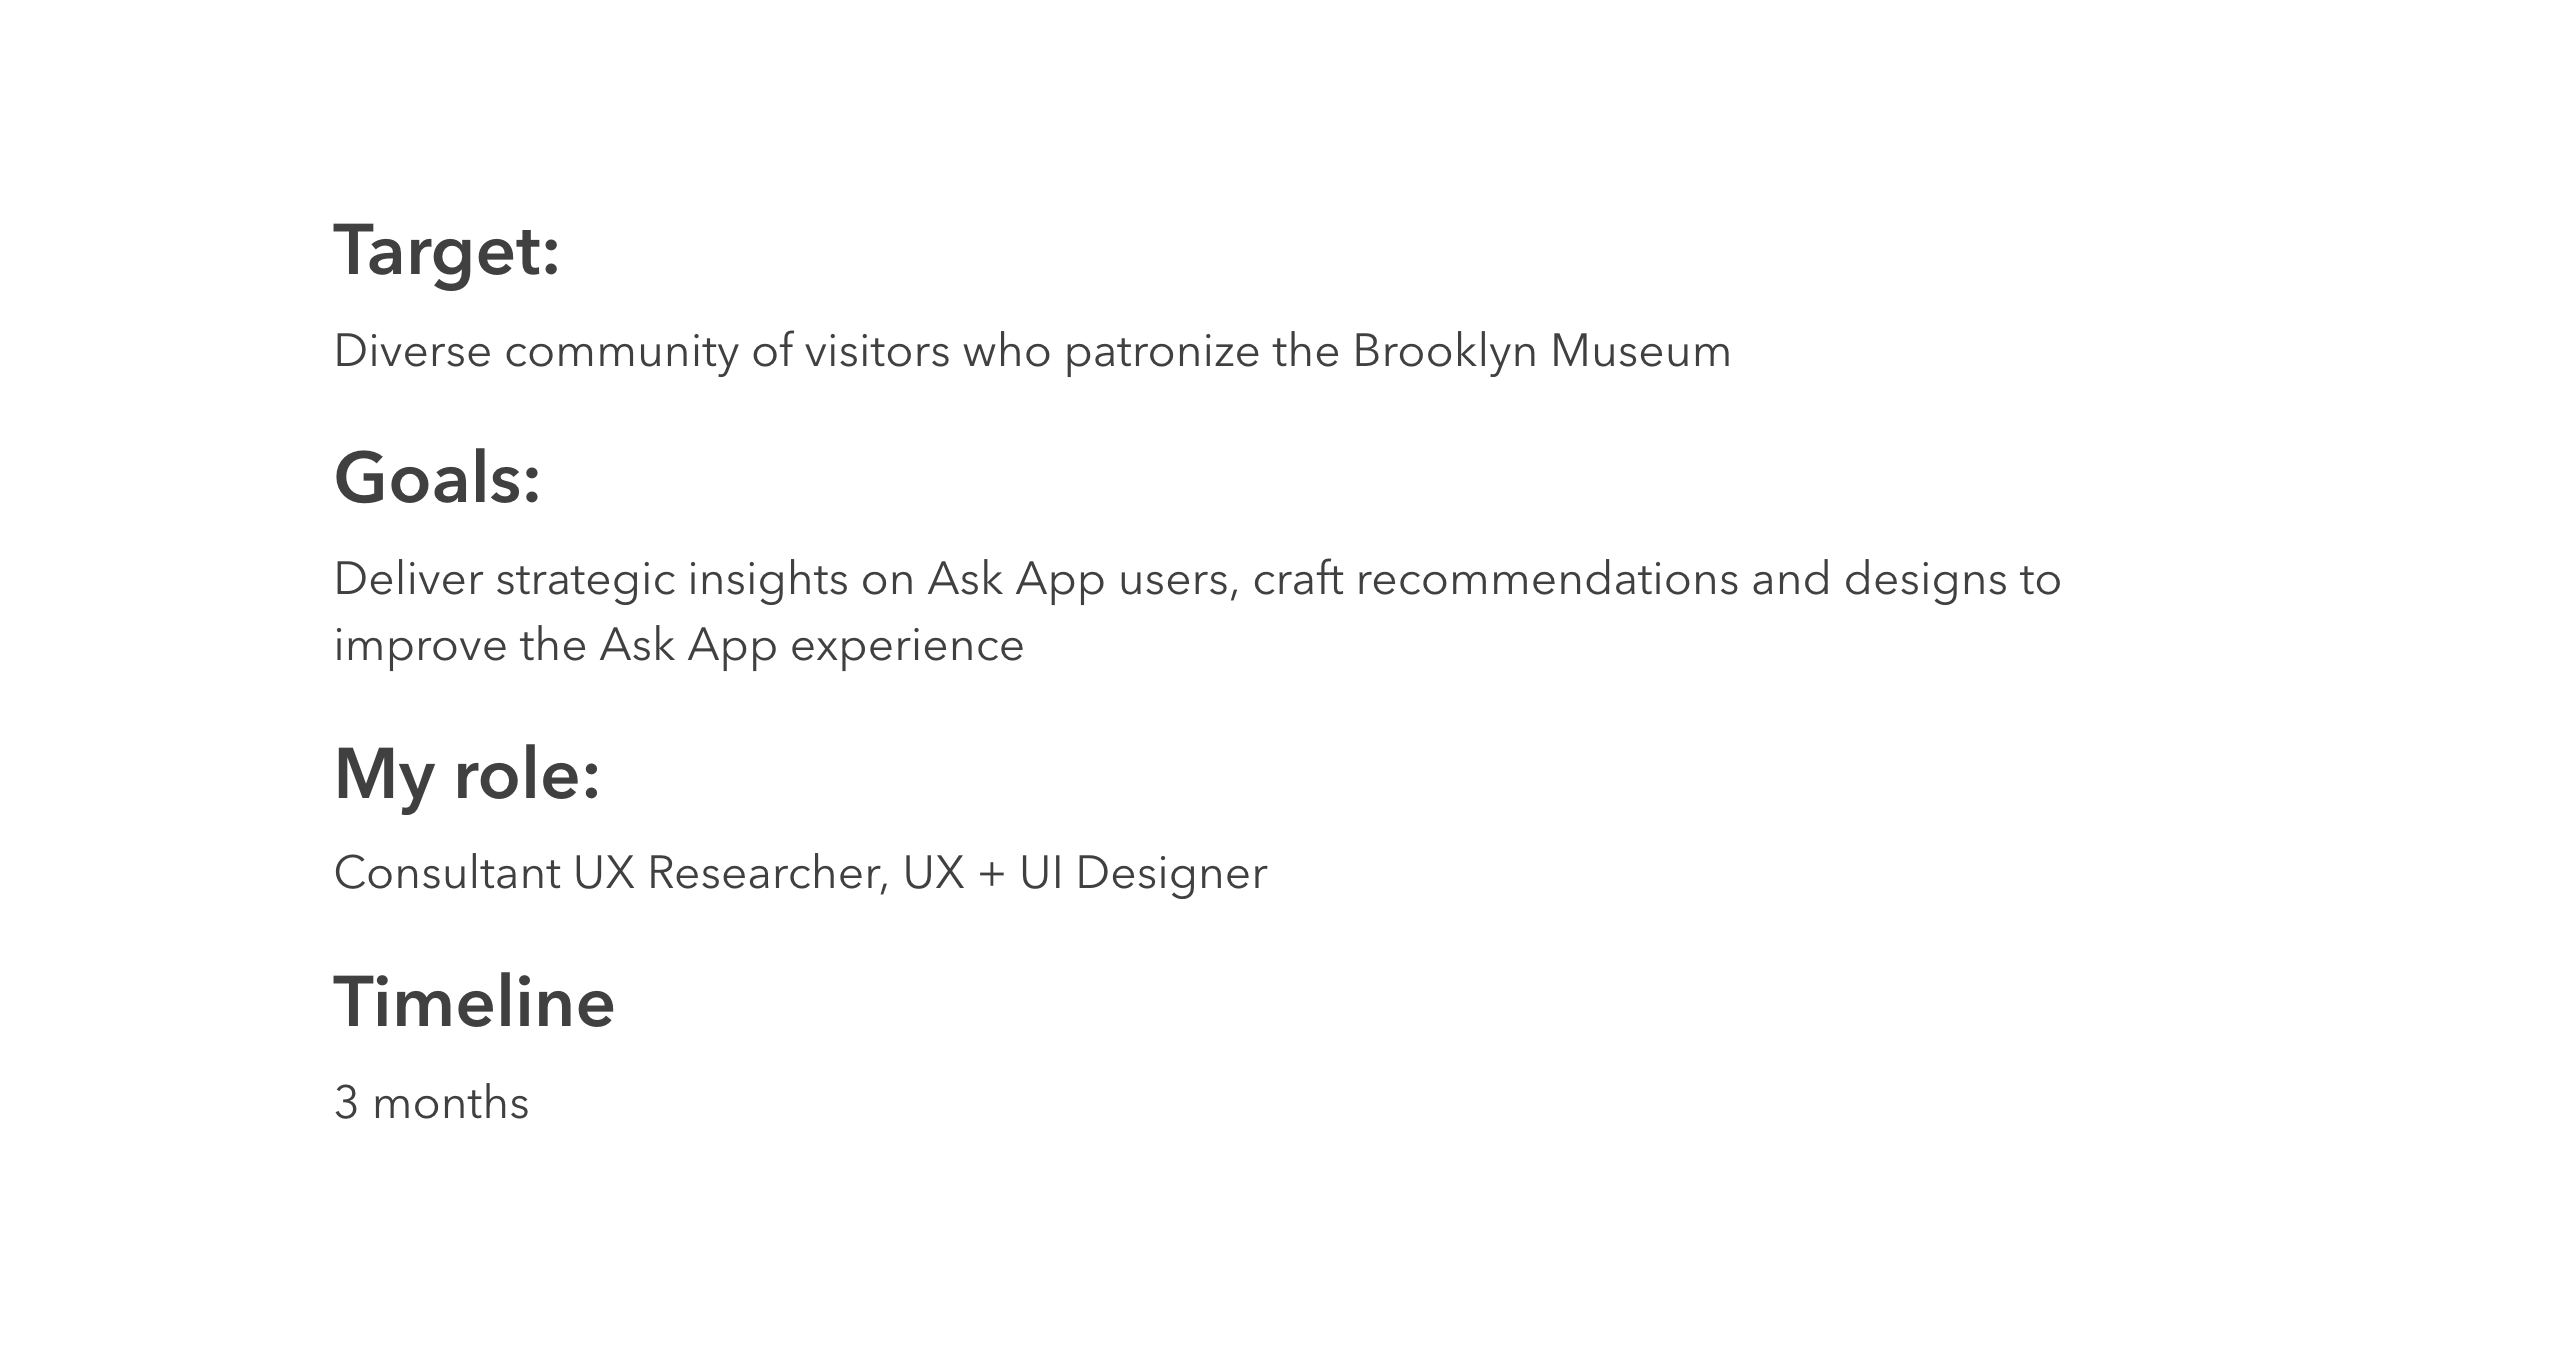 target, goals, my role, and timeline for the brooklyn ask app ux project